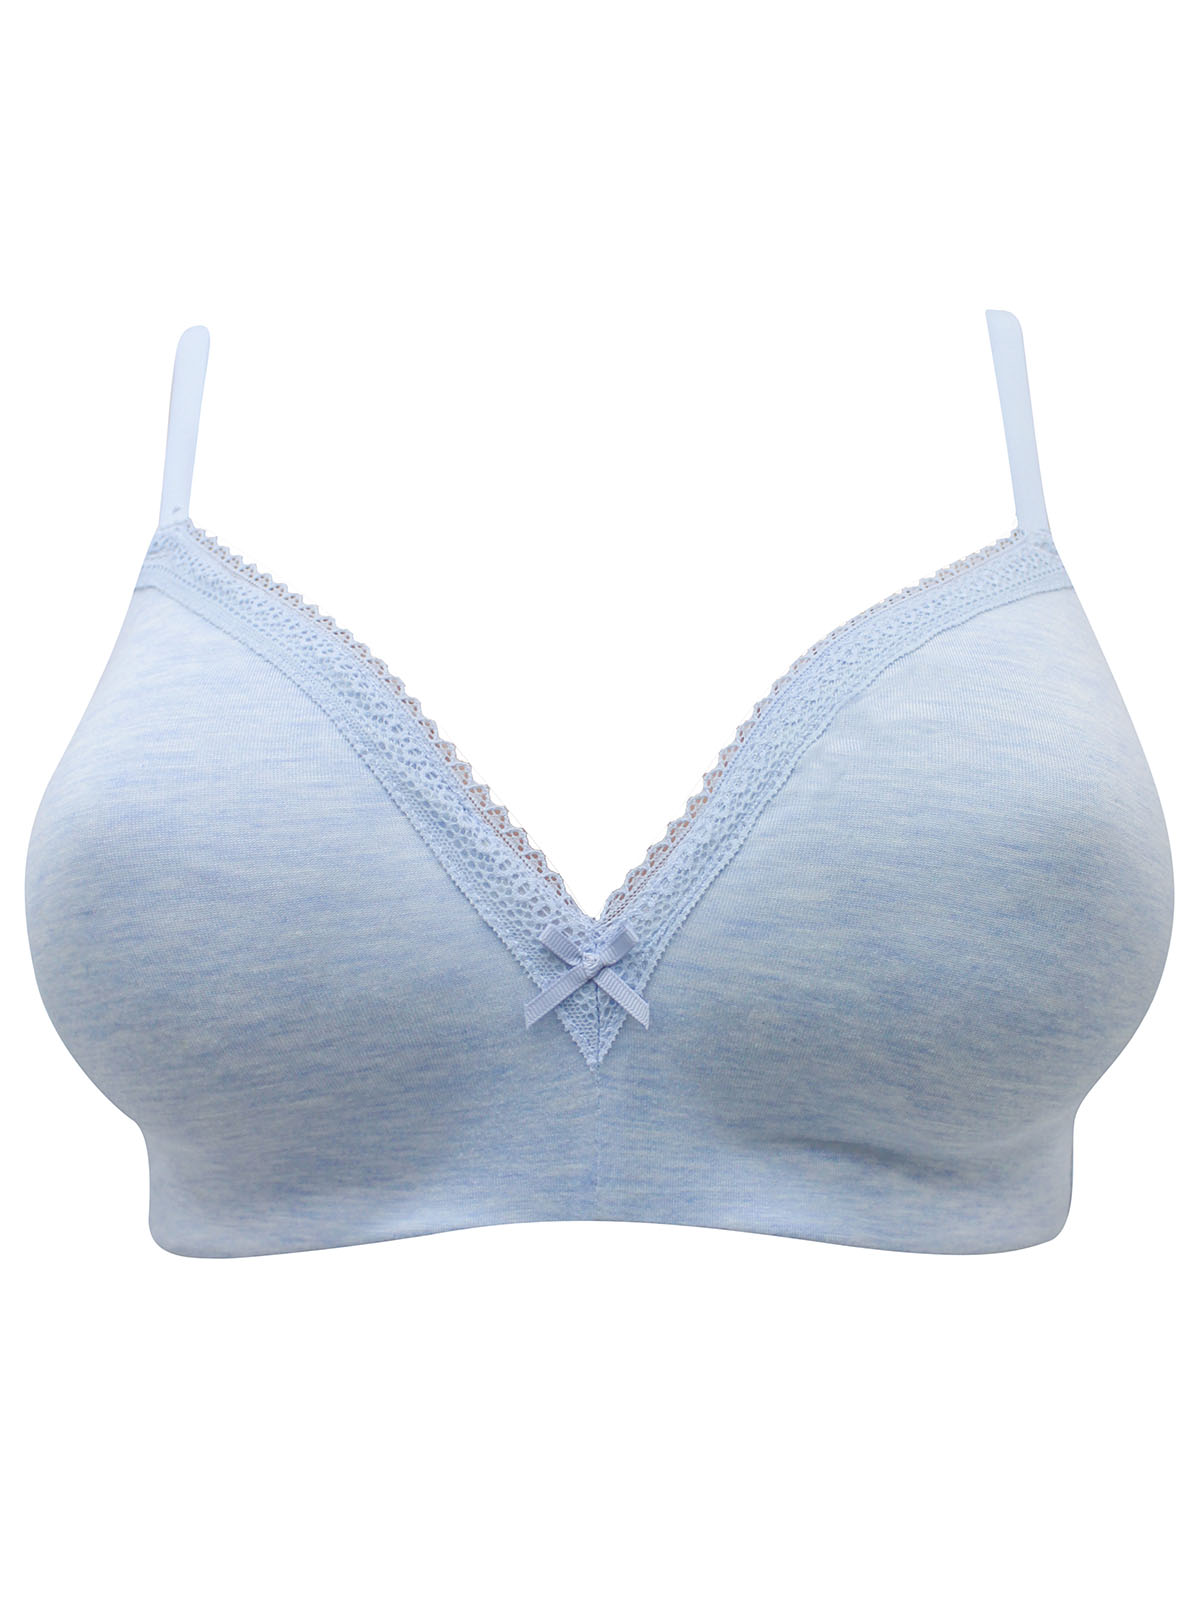 F&F - - F&F BLUE-MARL Modal Rich Non-Wired Full Cup T-Shirt Bra - Size ...